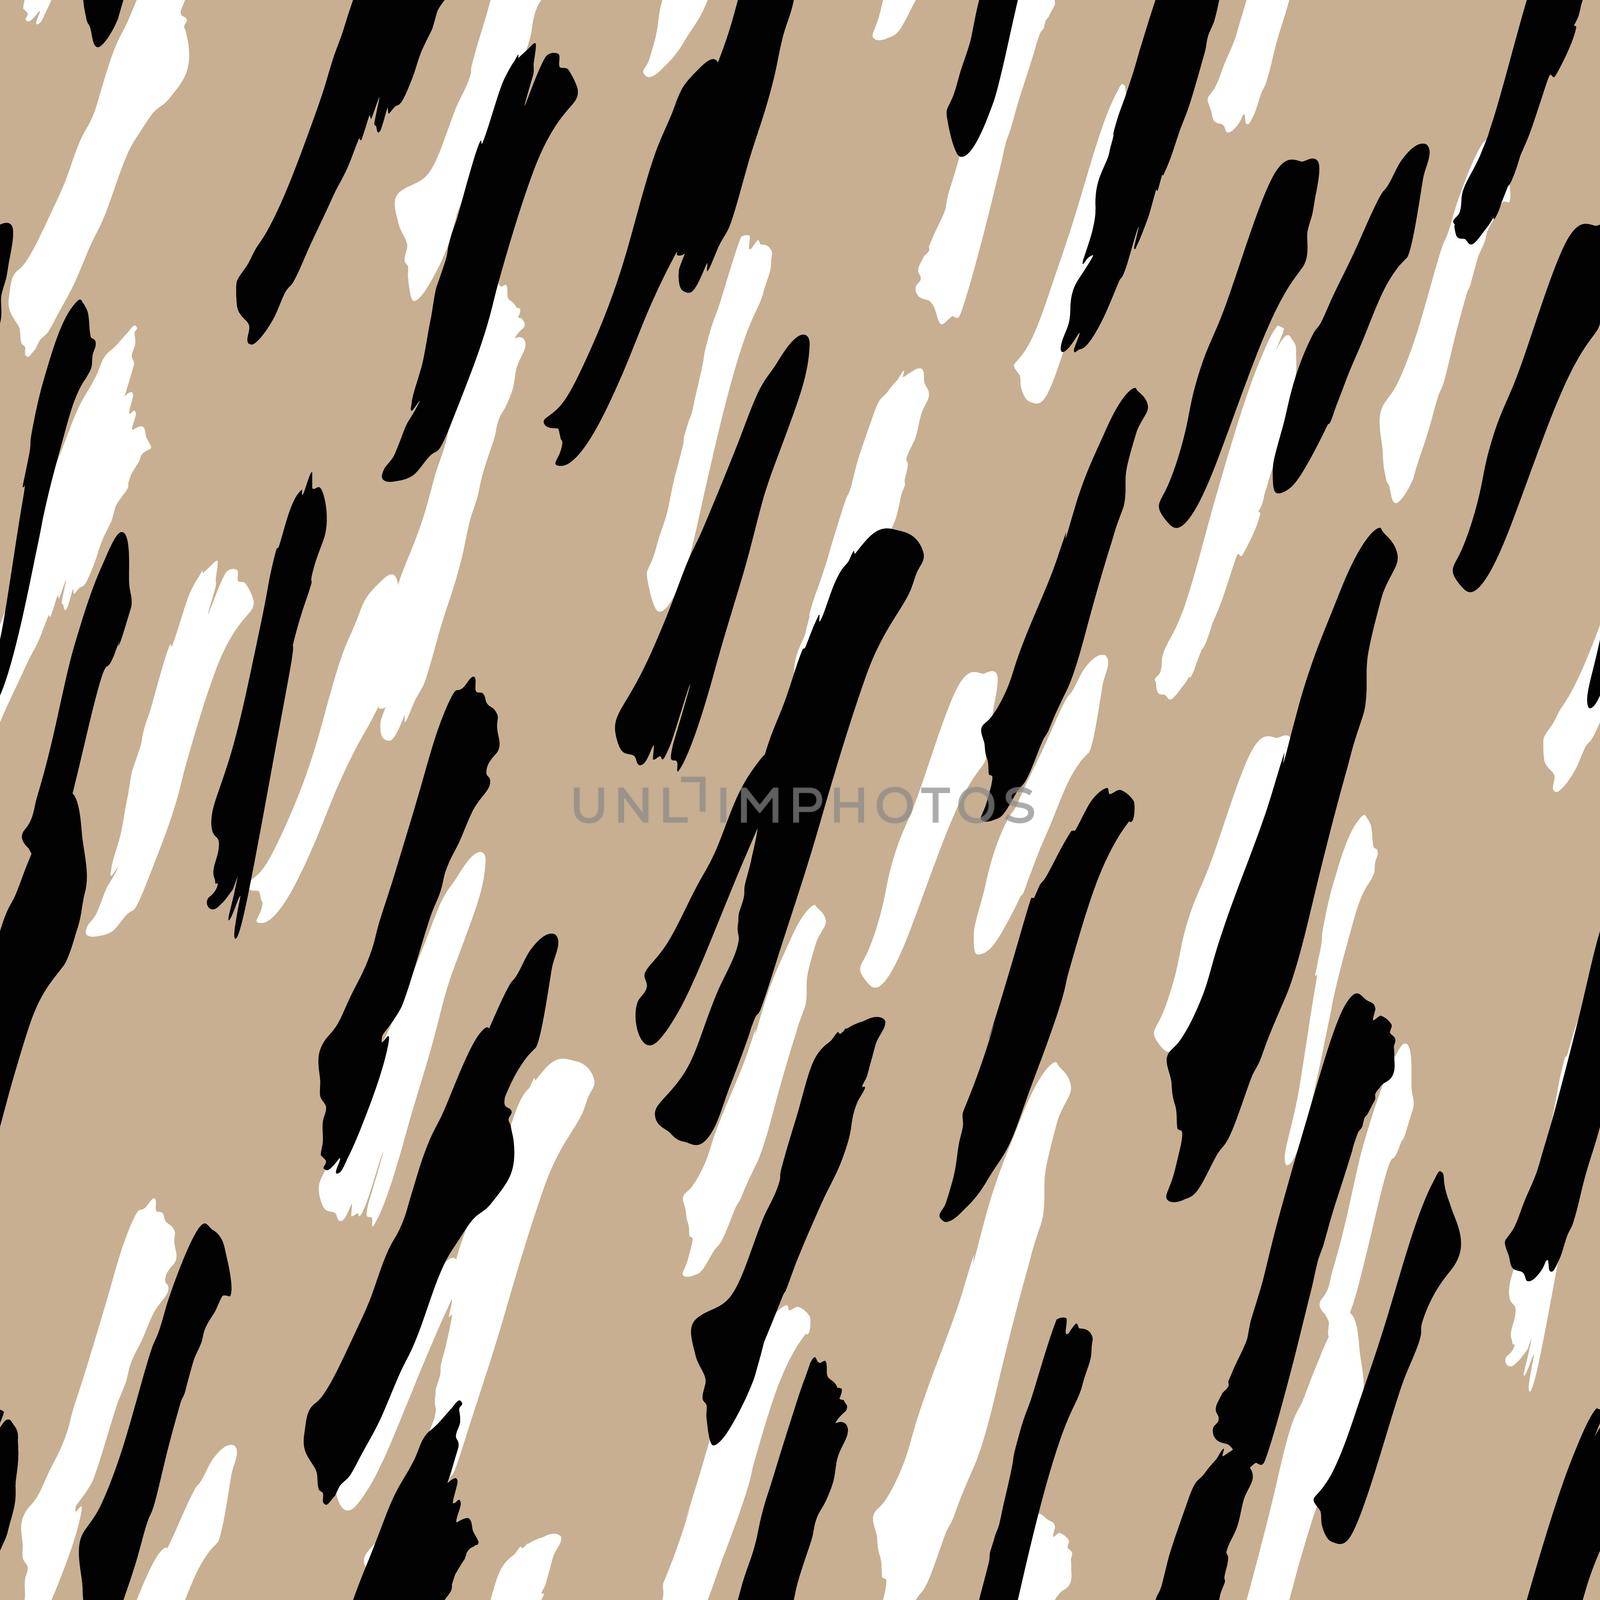 Abstract modern giraffe seamless pattern. Animals trendy background. Beige and black decorative vector stock illustration for print, card, postcard, fabric, textile. Modern ornament of stylized skin by allaku